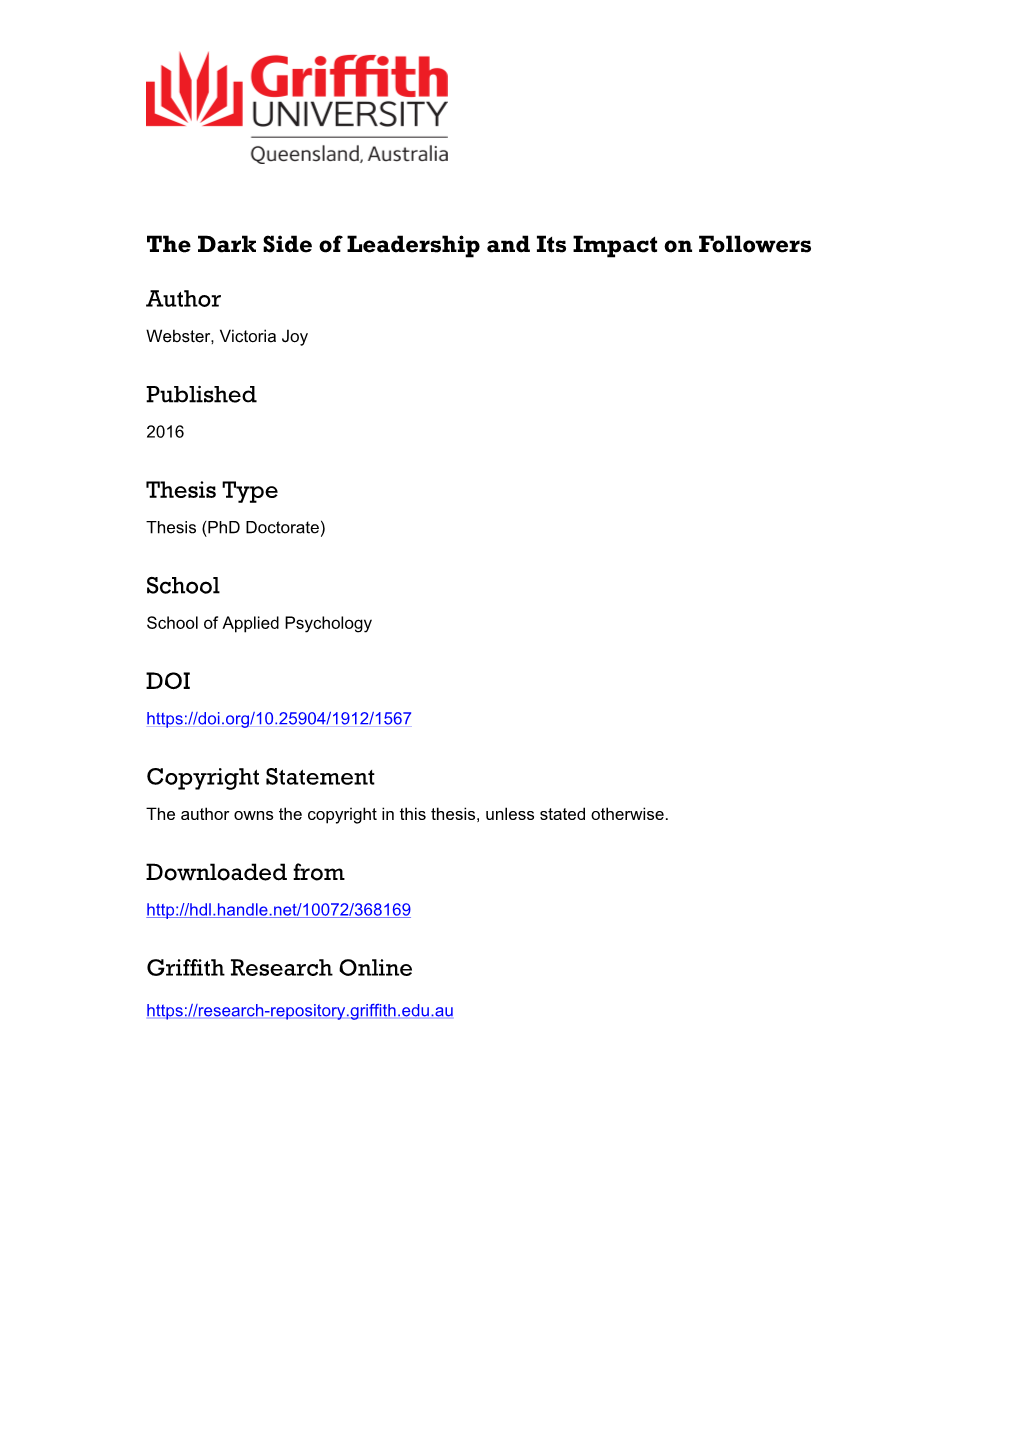 The Dark Side of Leadership and Its Impact on Followers